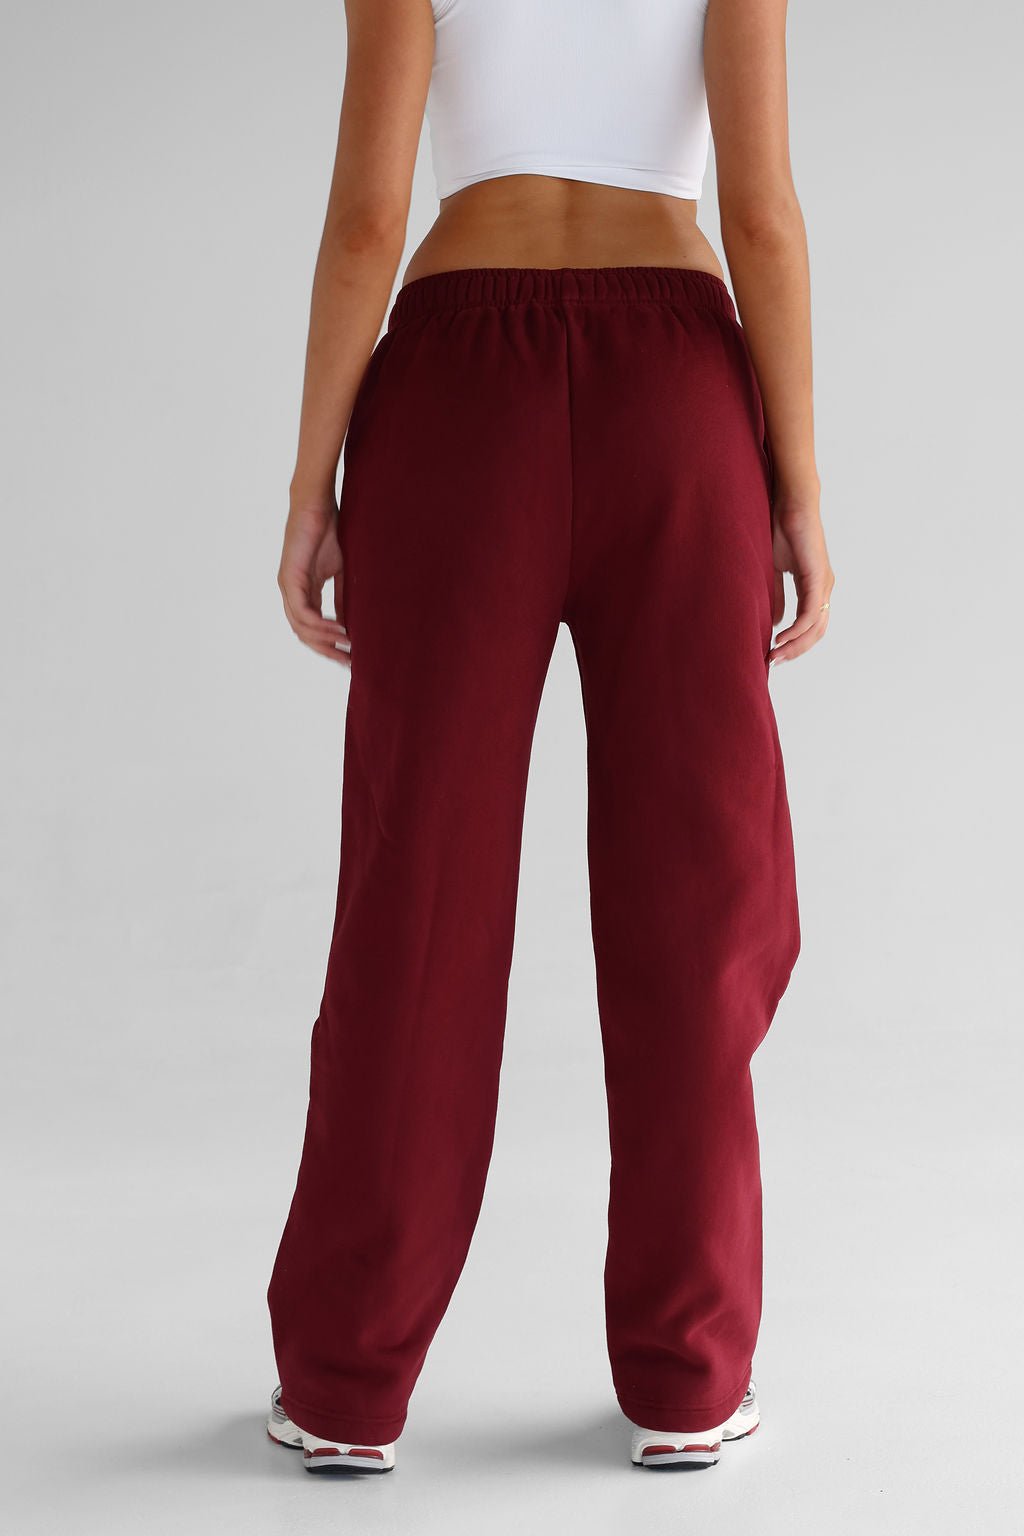 The Pilates Collection Relaxed Fit Sweatpants - Cherry Cola - LEELO ACTIVE